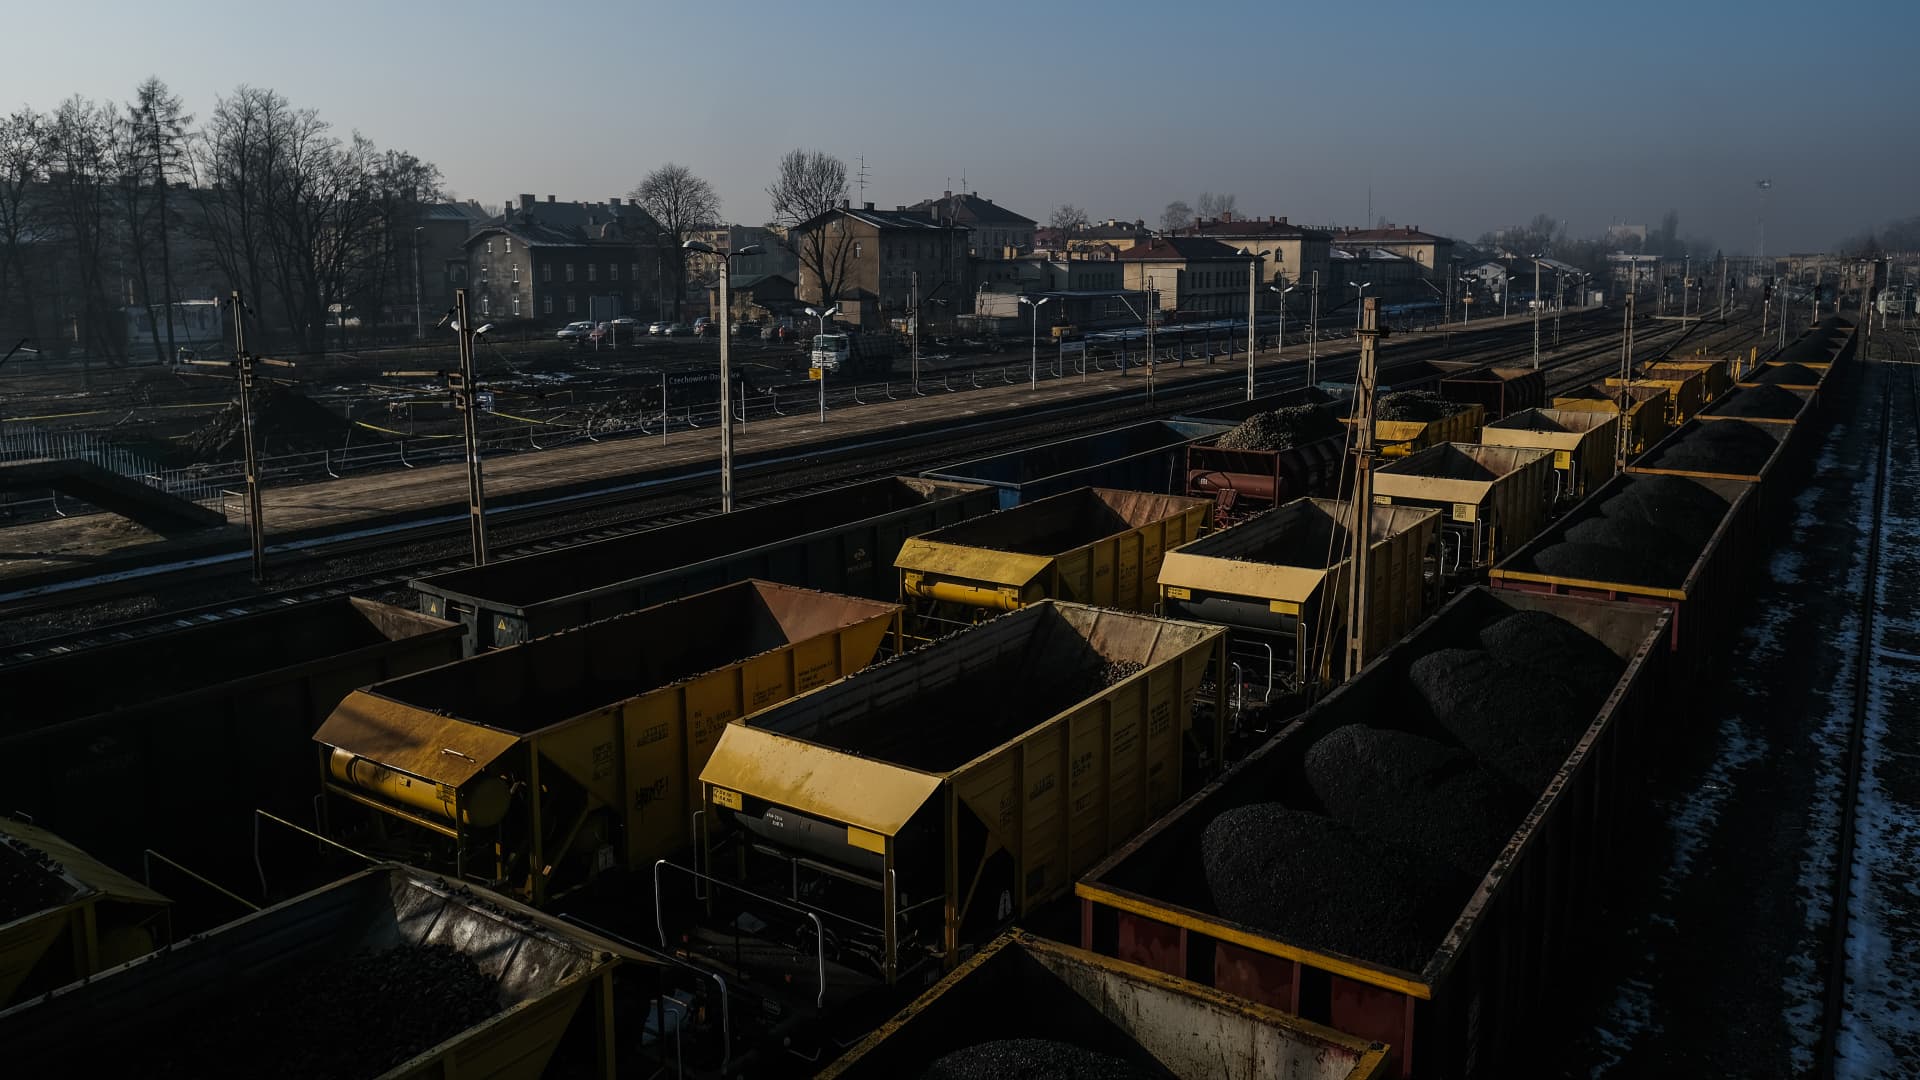 A view of open freight wagons full of coal under smog during a day that the level of PM2.5 dust concentration amounted to 198 ug/m3 on February 22, 2021 in Czechowice Dziedzice, Poland. The central eastern European country has the EU’s worst air, according to a report published by the European Environment Agency (EEA).